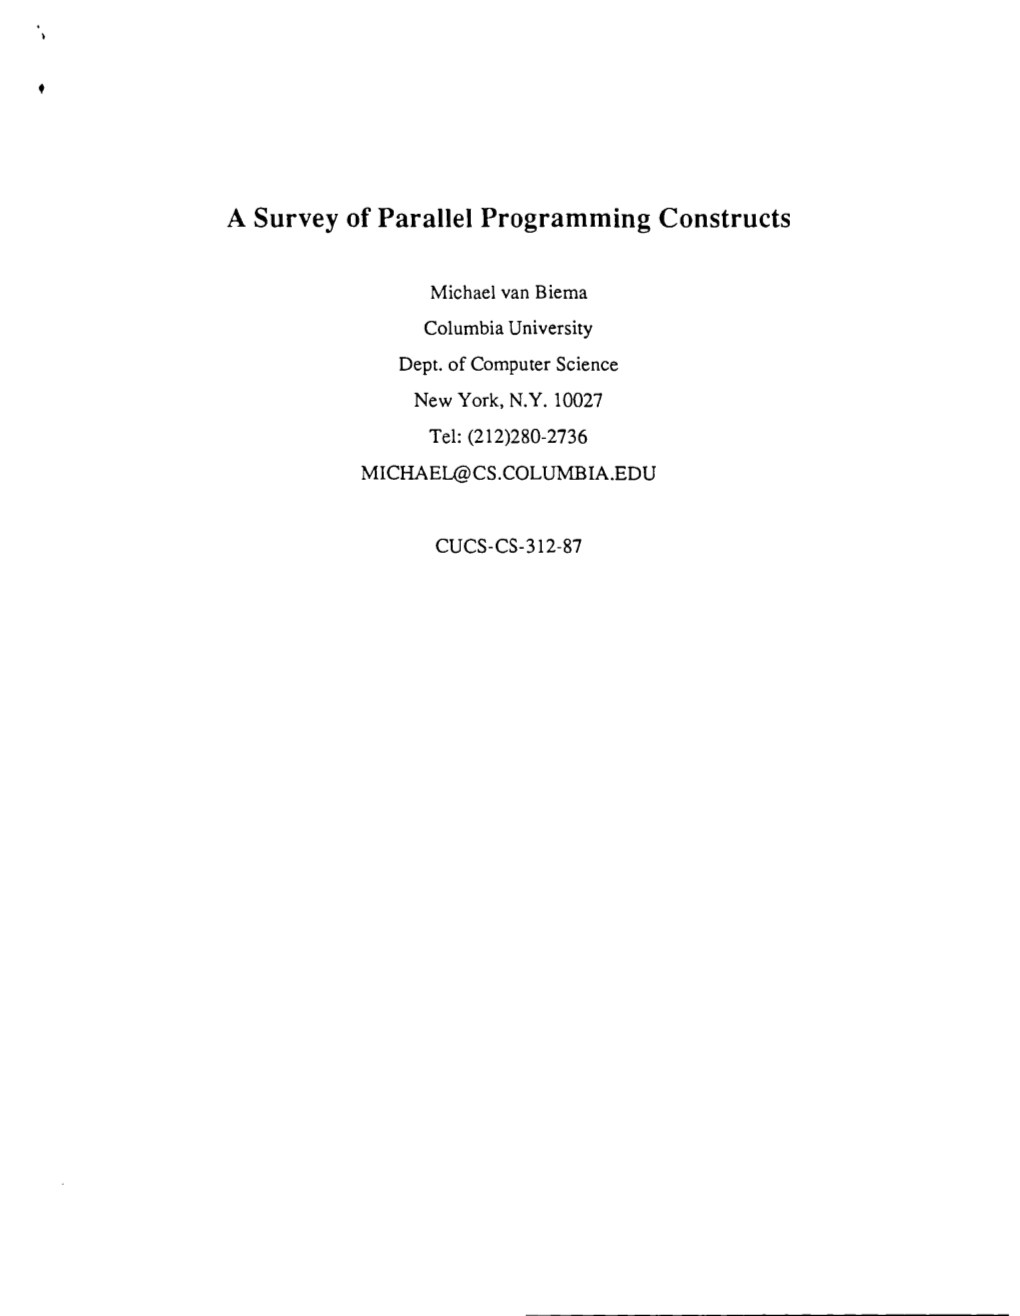 A Survey of Parallel Programming Constructs